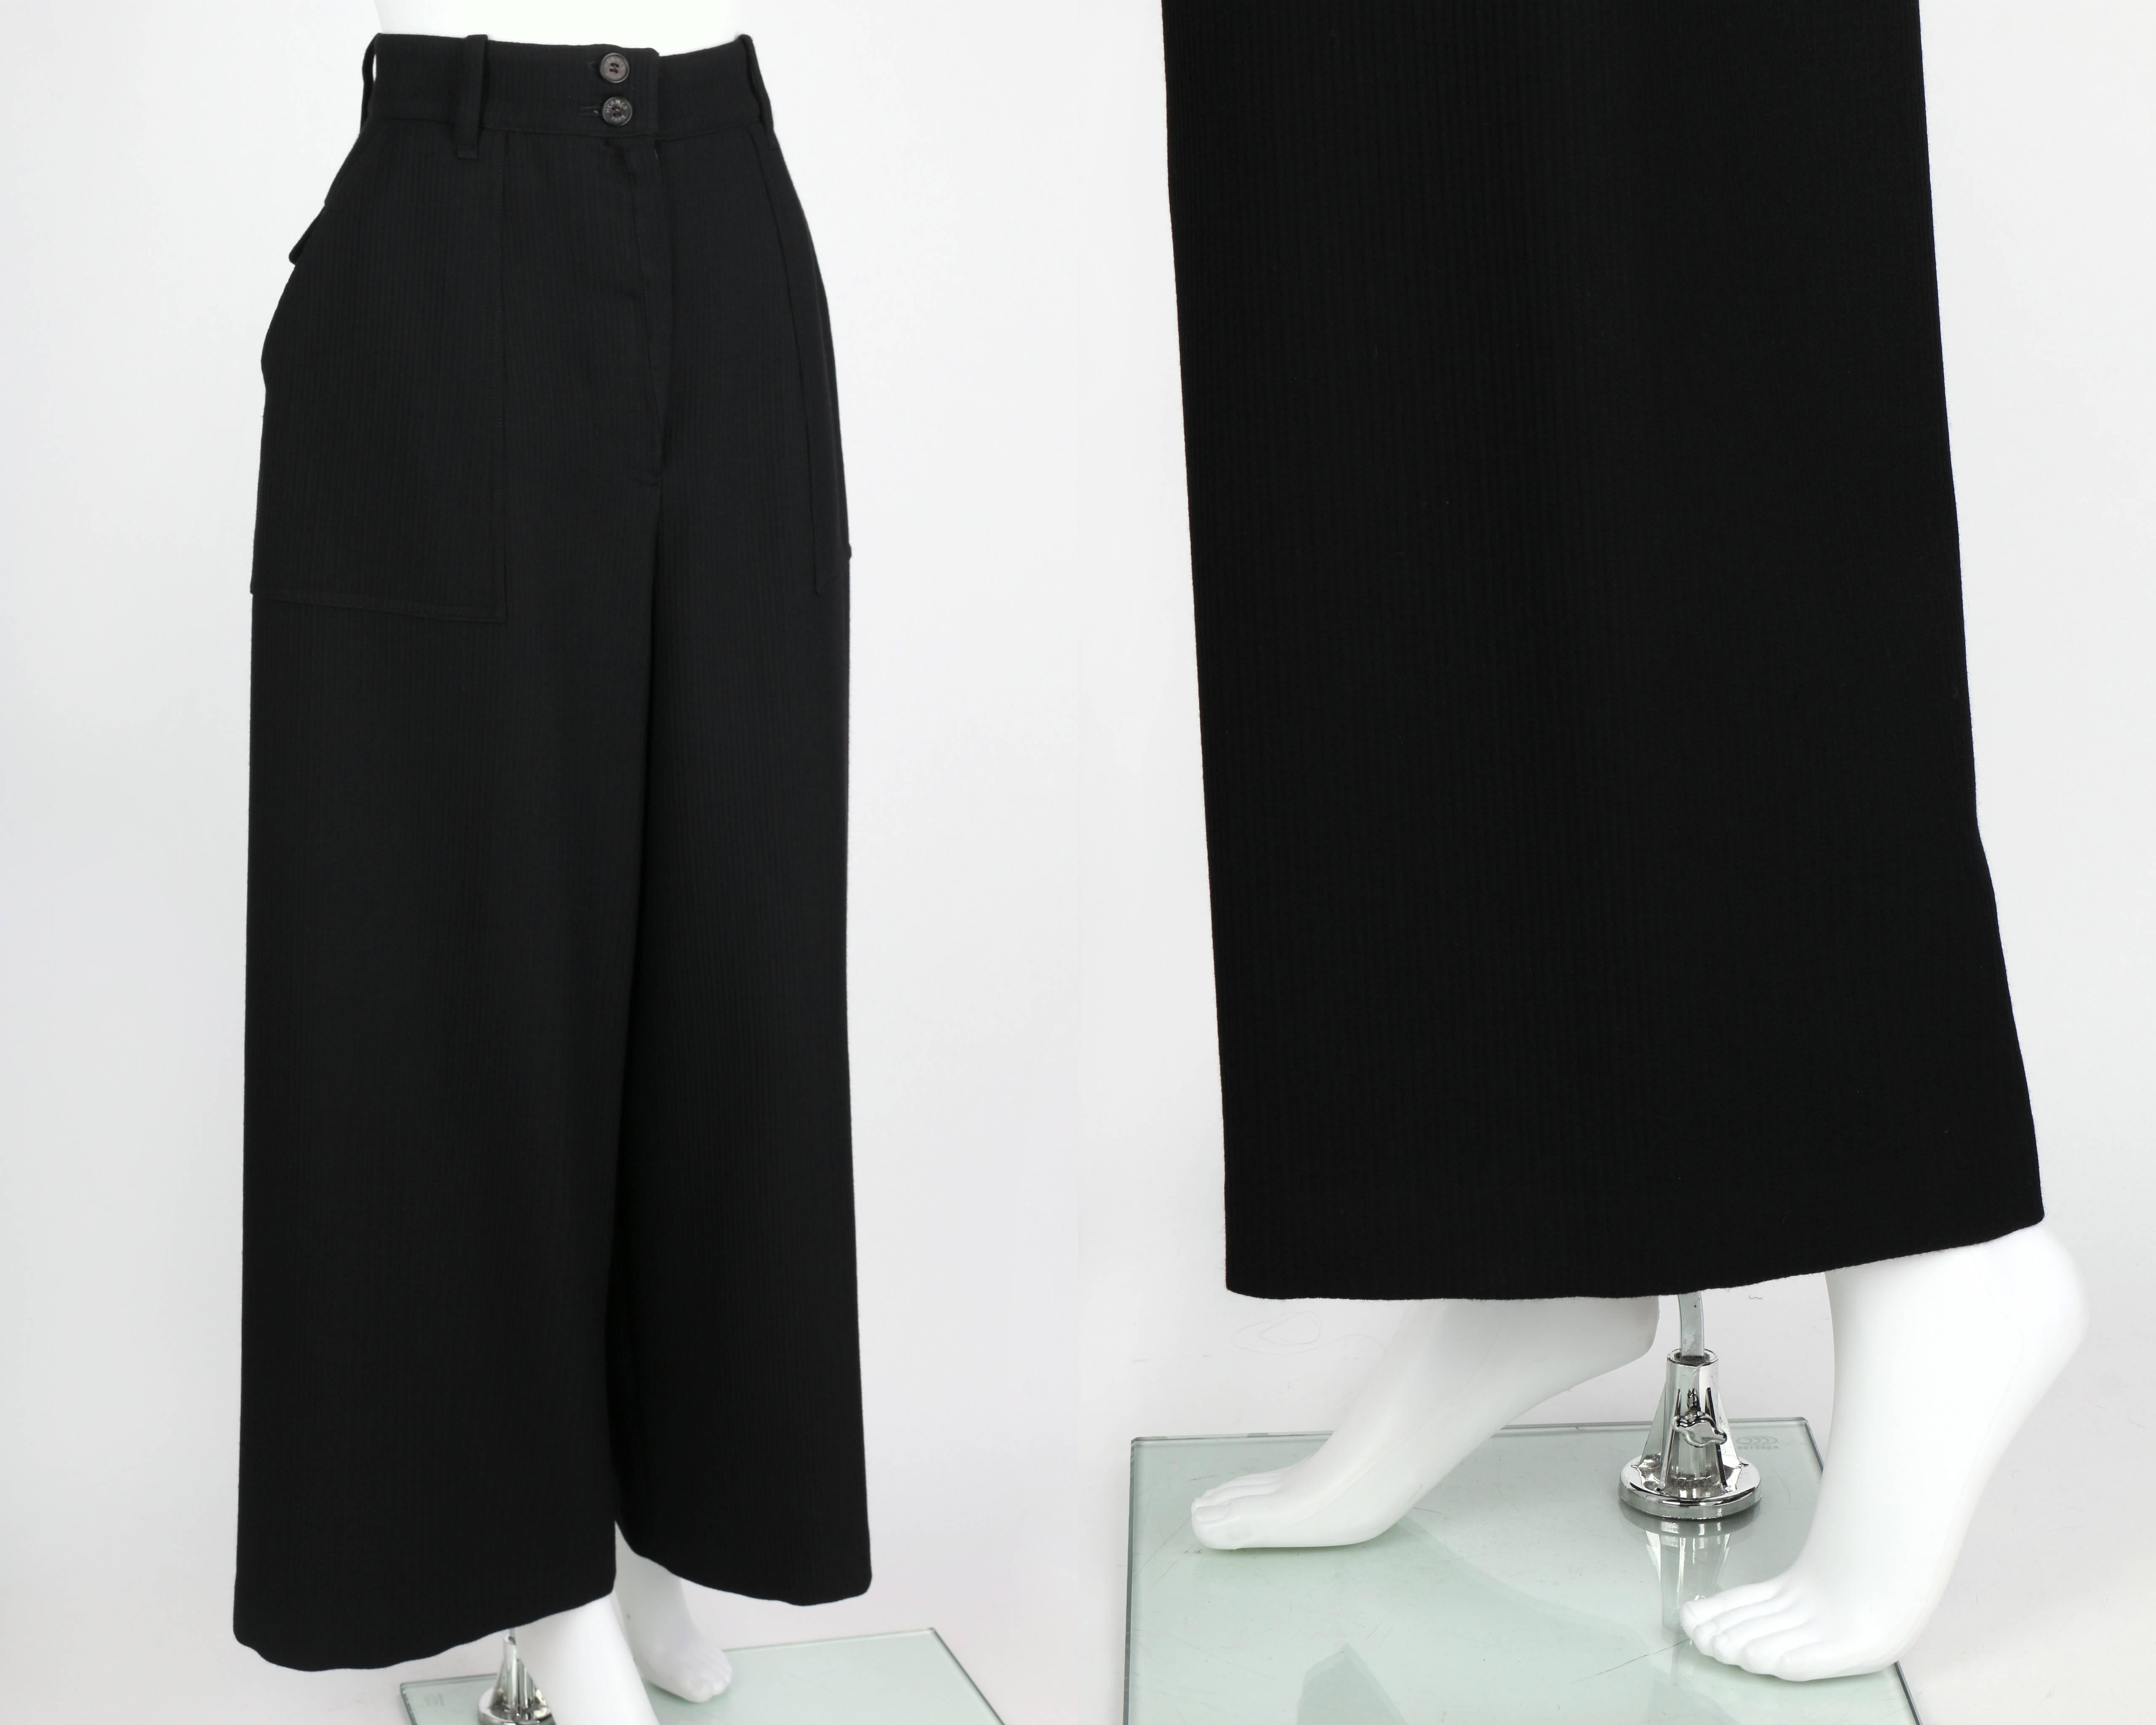 Hermes c.1990's classic black wool wide leg pants. Ribbed herringbone wool. High waisted. Five belt loops. Center front zip fly with two button closures at top. Two front large hip pockets. Two back patch pockets with flap. Partially lined. Legs